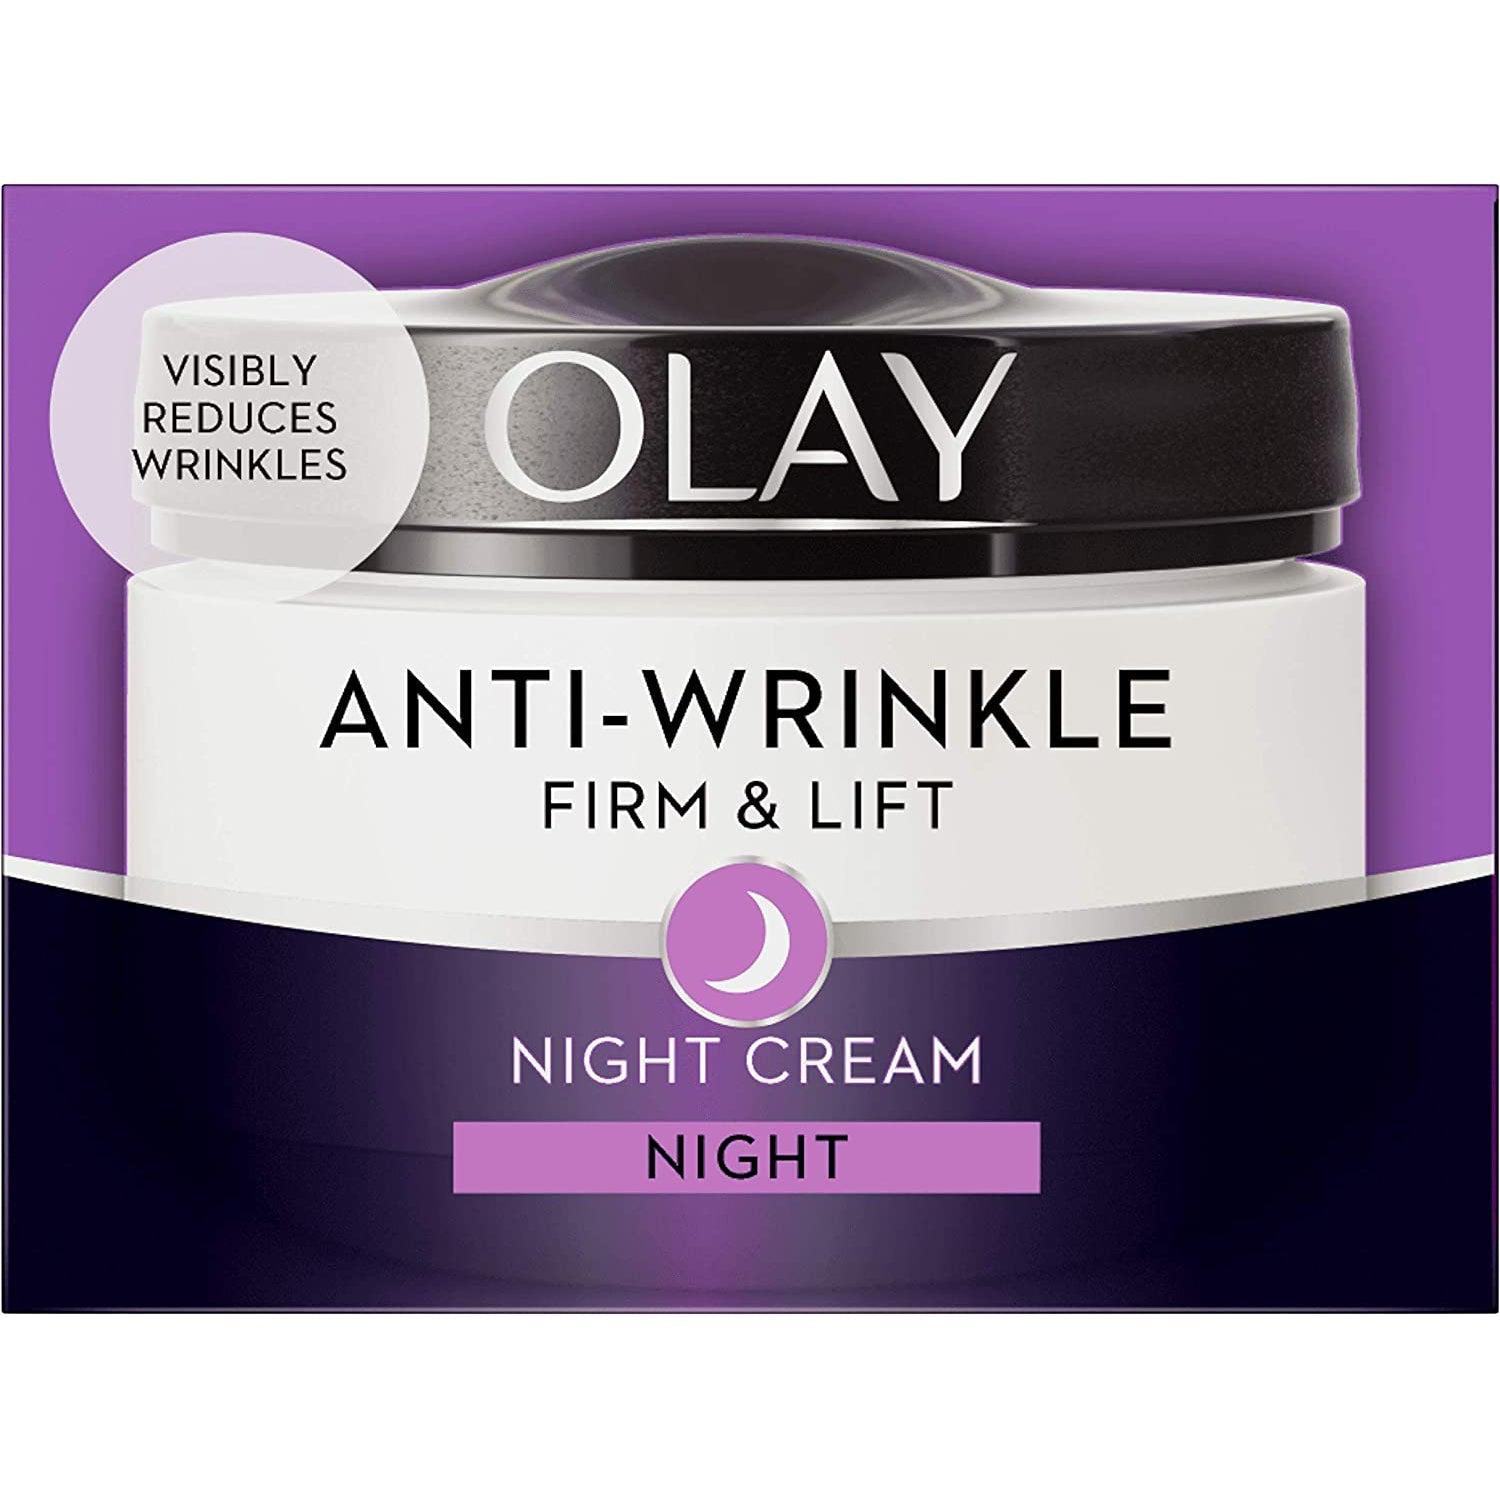 Olay Anti-Wrinkle Firm and Lift Anti-Ageing Moisturiser Night Cream - 50 ml - Healthxpress.ie